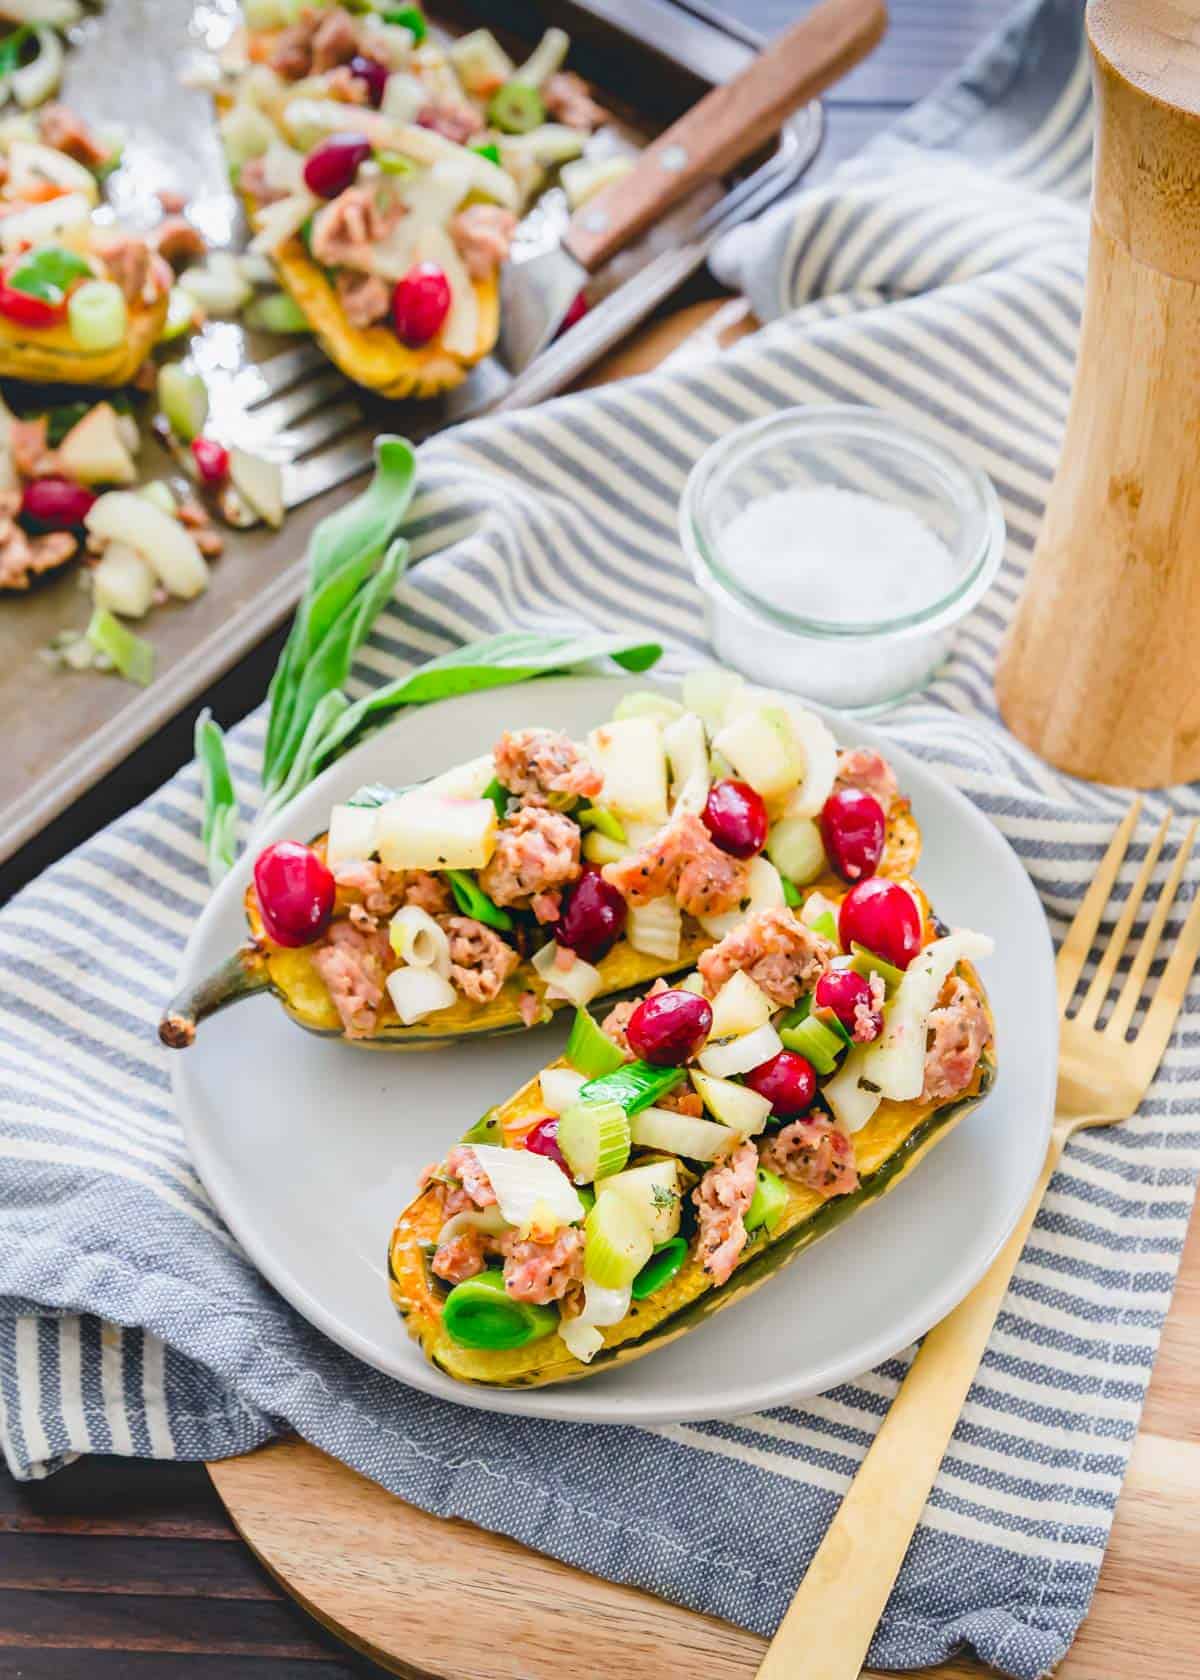 Stuffed squash boats with salmon and cranberries.